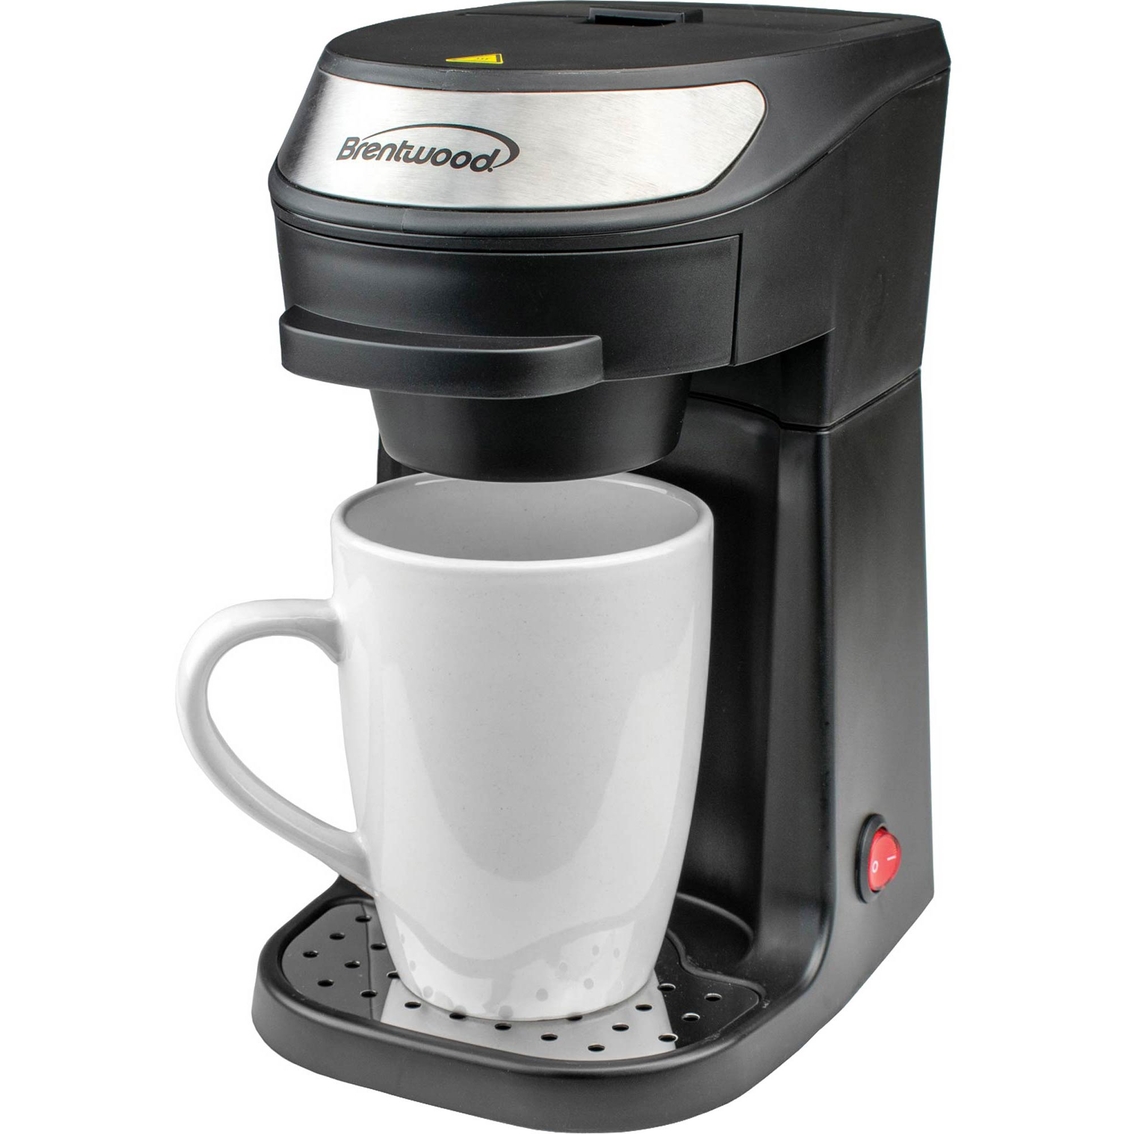 Brentwood Single Serve Coffee Maker with Mug - Image 2 of 4